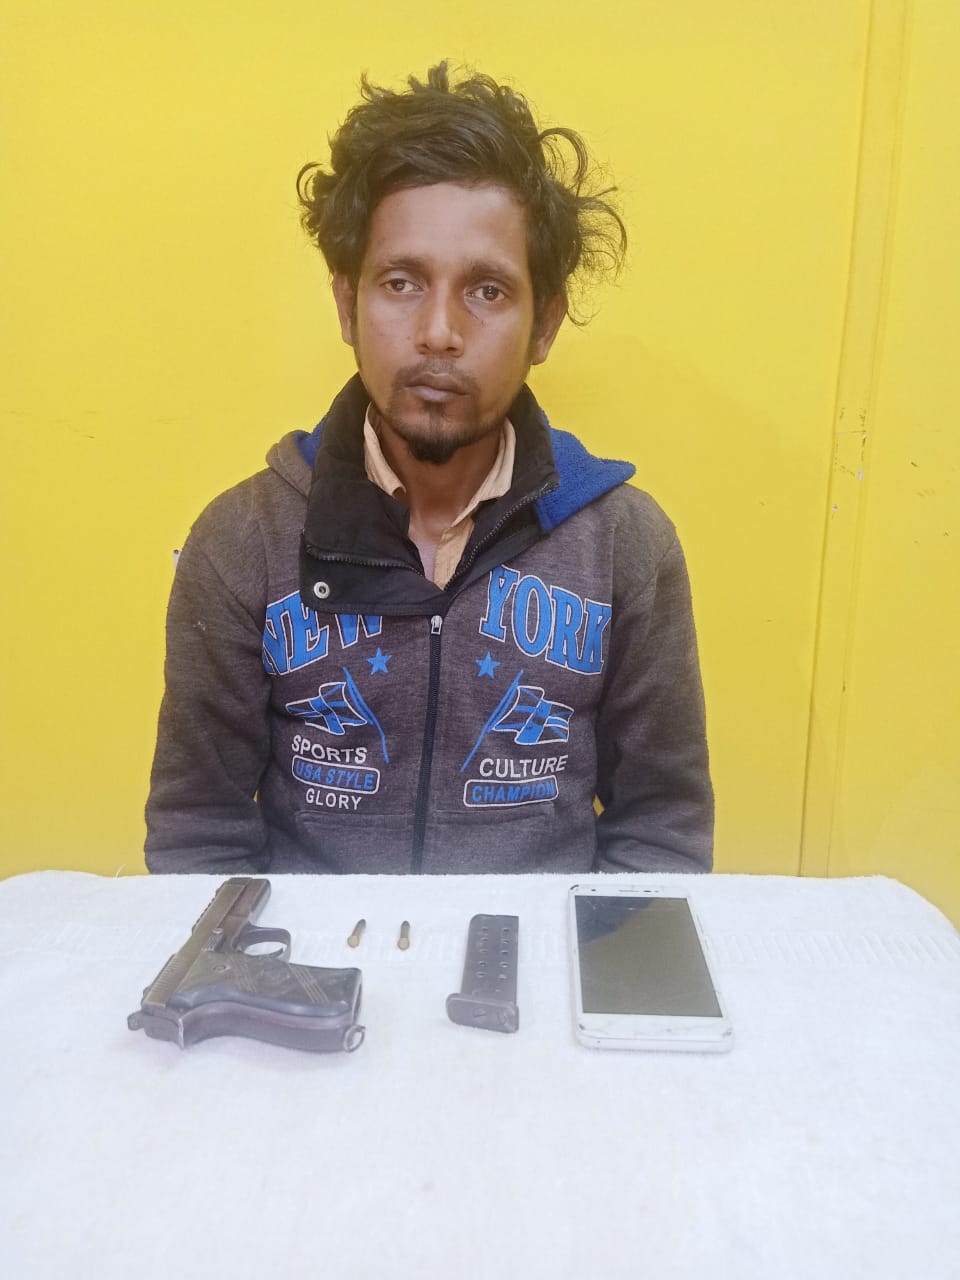 One person arrested with pistol